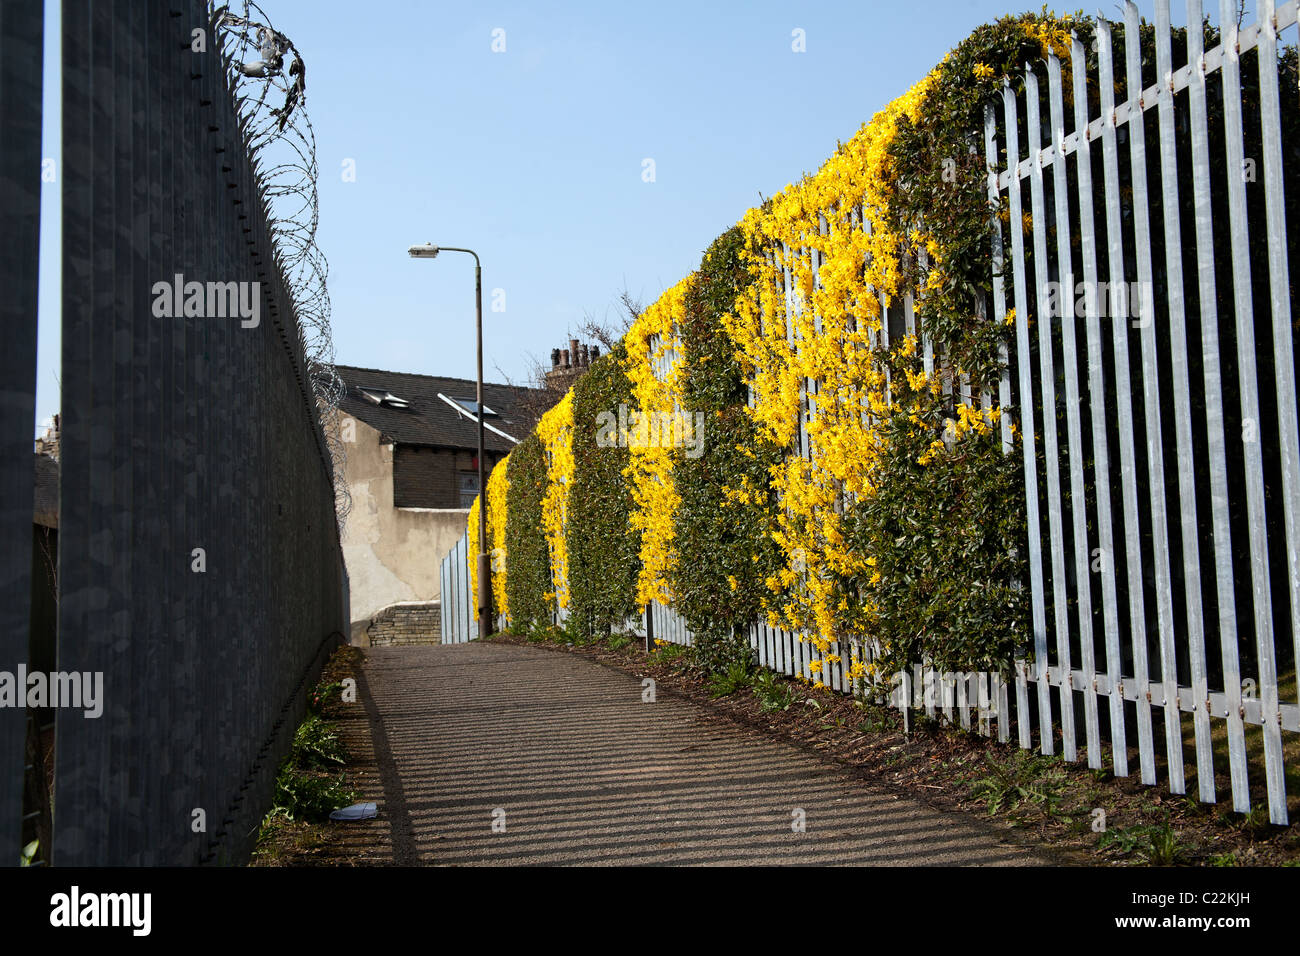 Yellow flowers and green leaves on a metal fence in a side street in Bradford, England UK Stock Photo